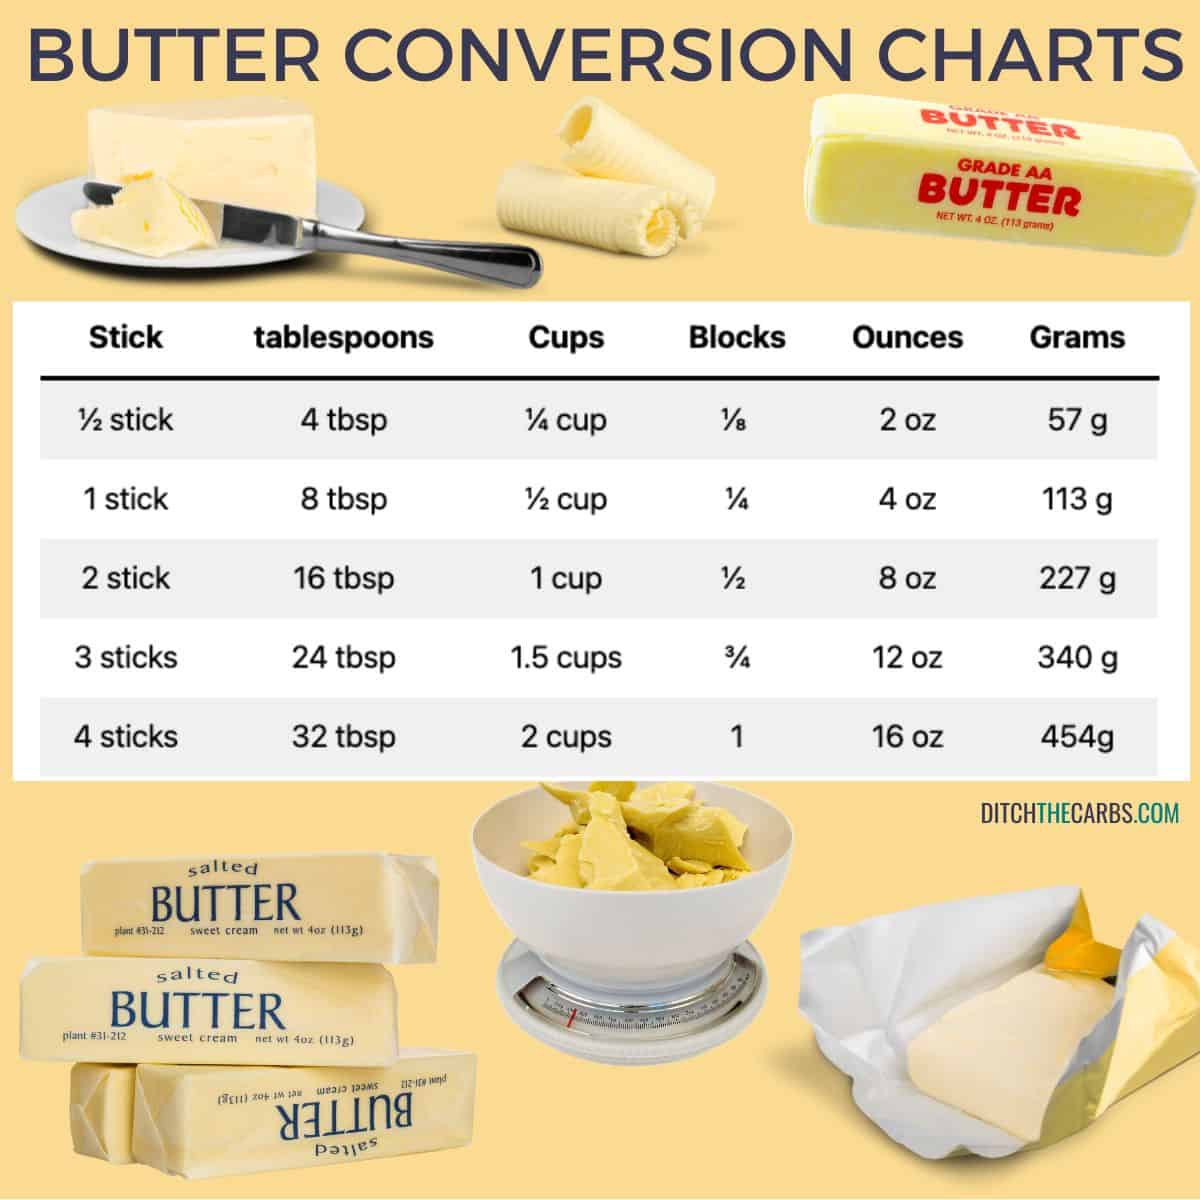 measuring butter conversion charts